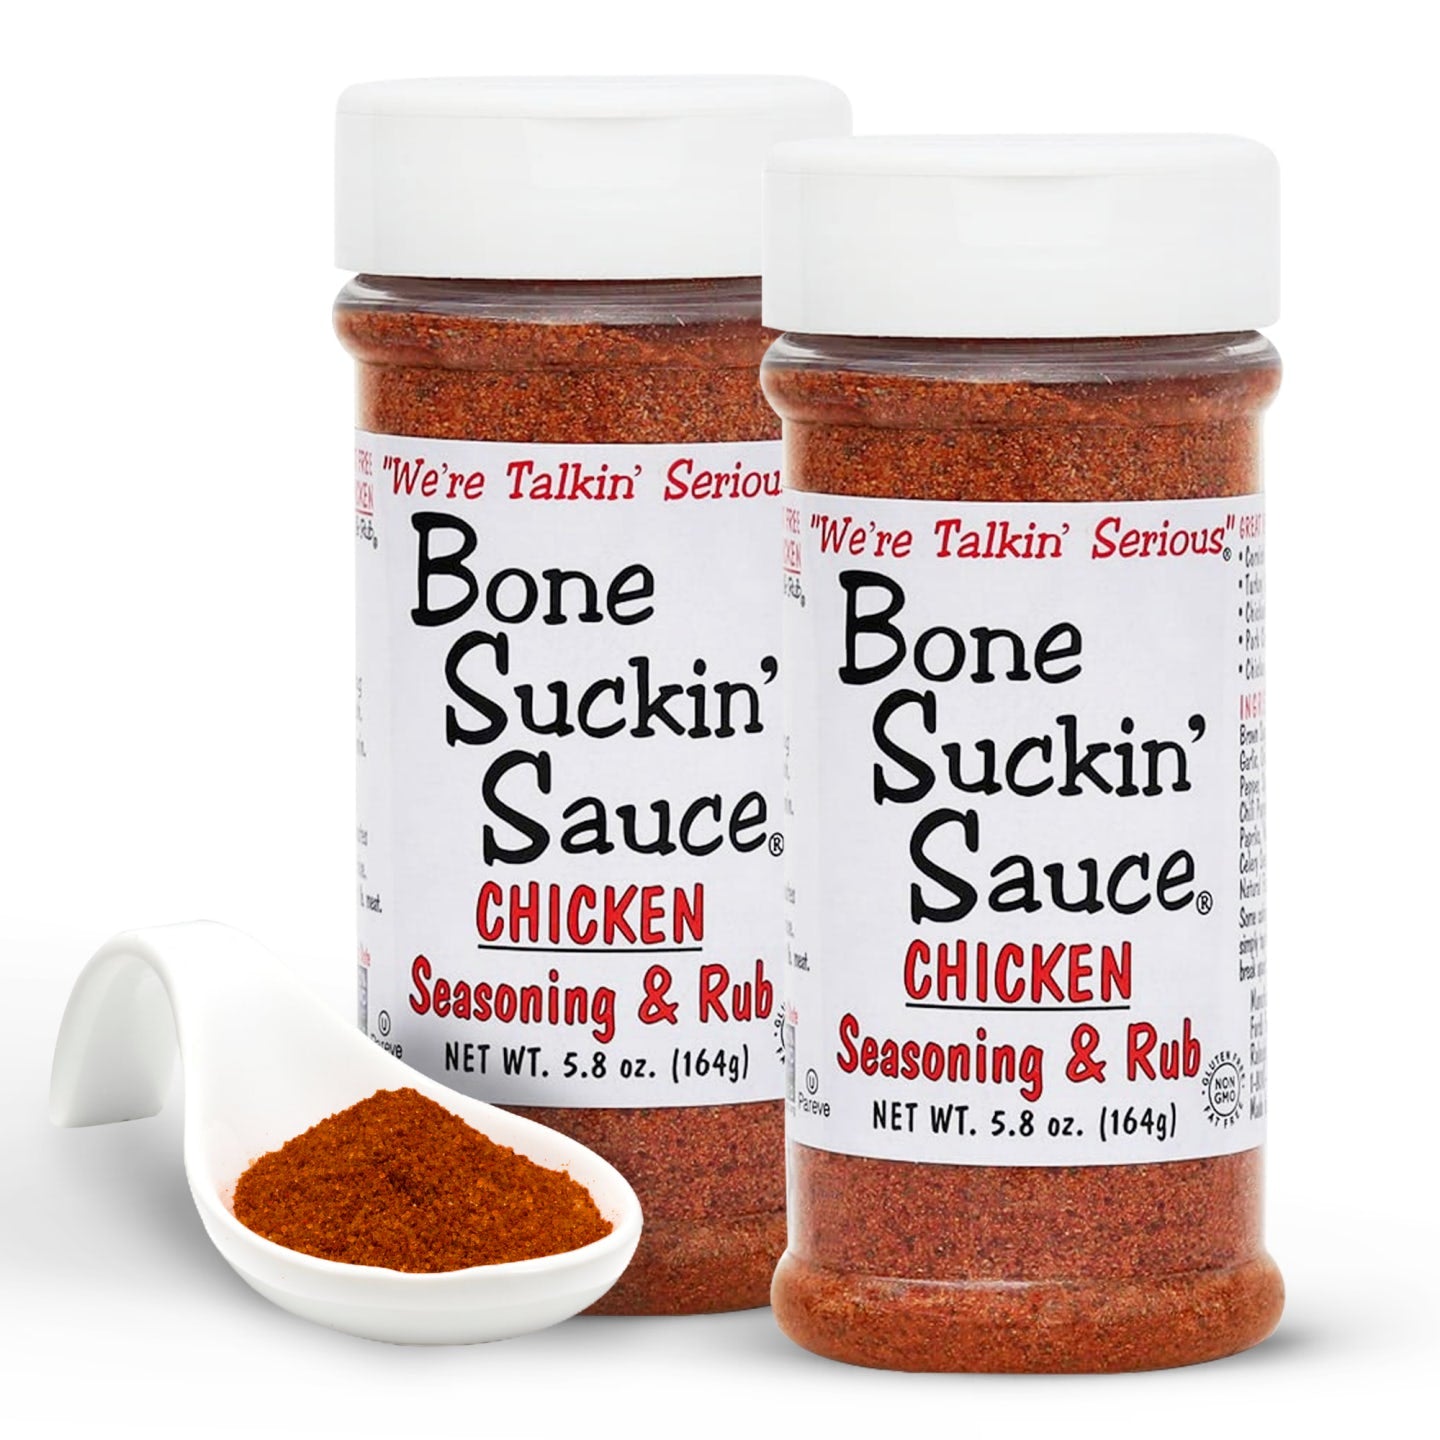 Bone Suckin'® Chicken Seasoning & Rub, 5.8 oz. A lighter blend of the brown sugar, paprika and spices found in the Original Seasoning & Rub, garlic and sage come to the forefront of our poultry blend. While it’s perfect on chicken, turkey, and fish, like our other seasoning & rub products, it’s versatile enough to be used on just about anything. 2 pack